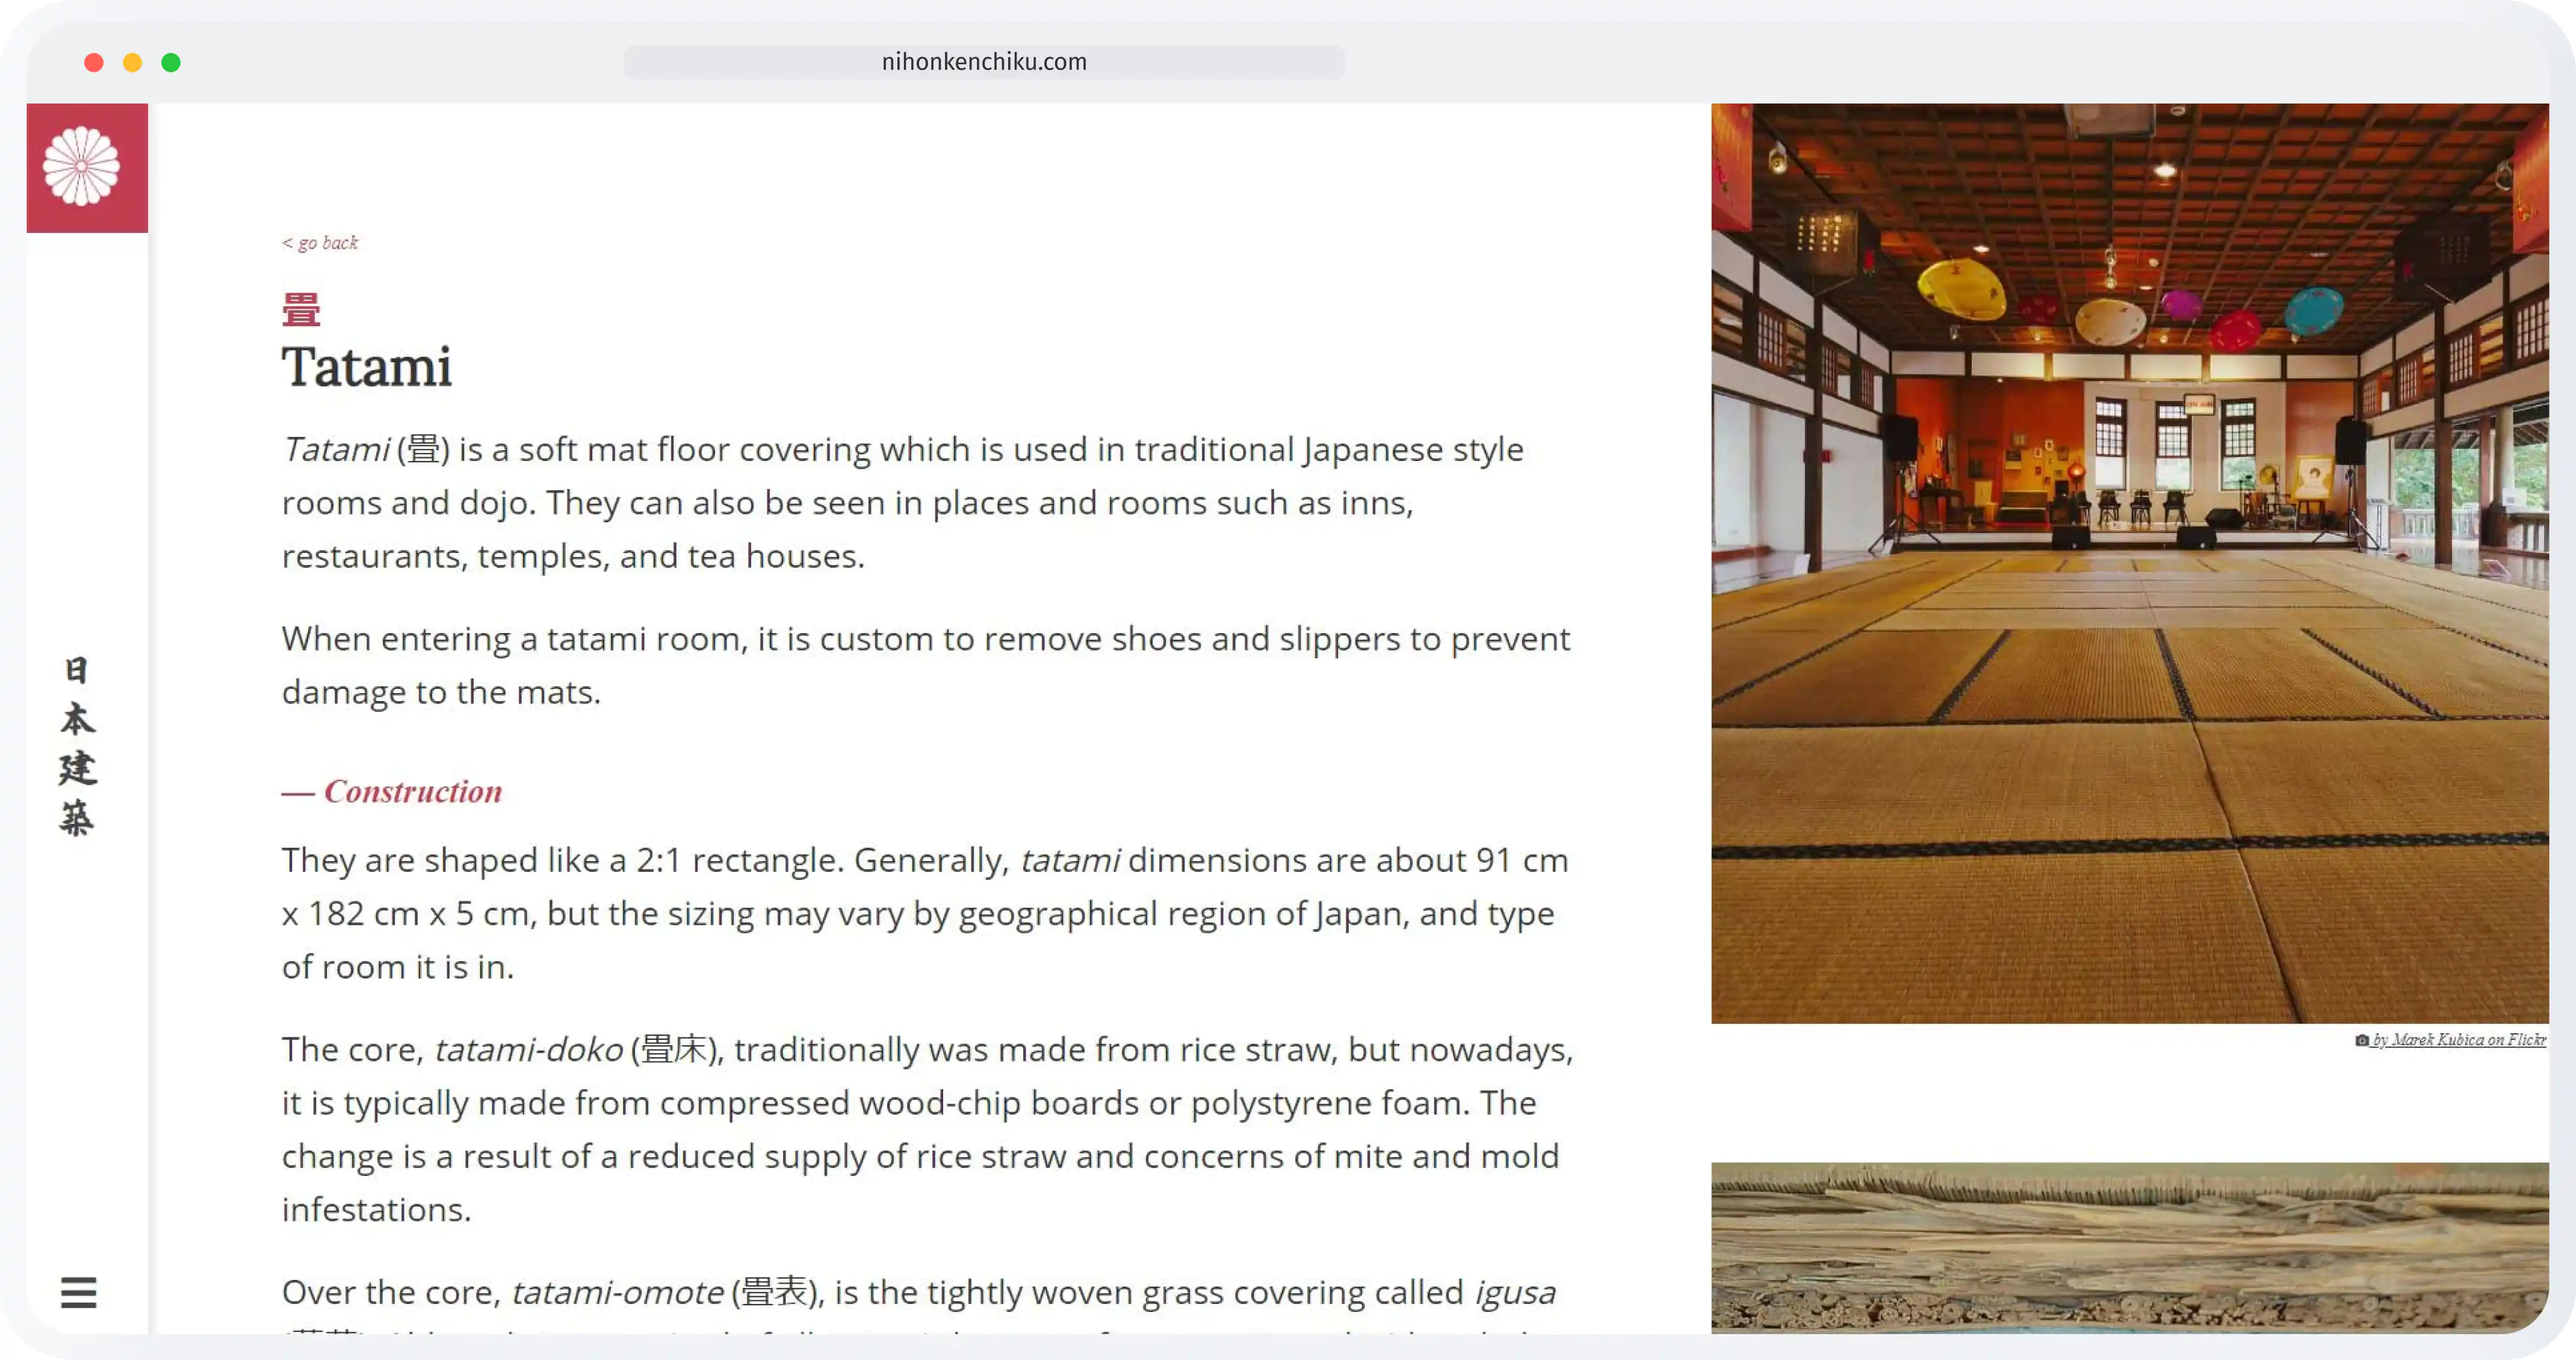 Image of a webpage with information about Tatami mats